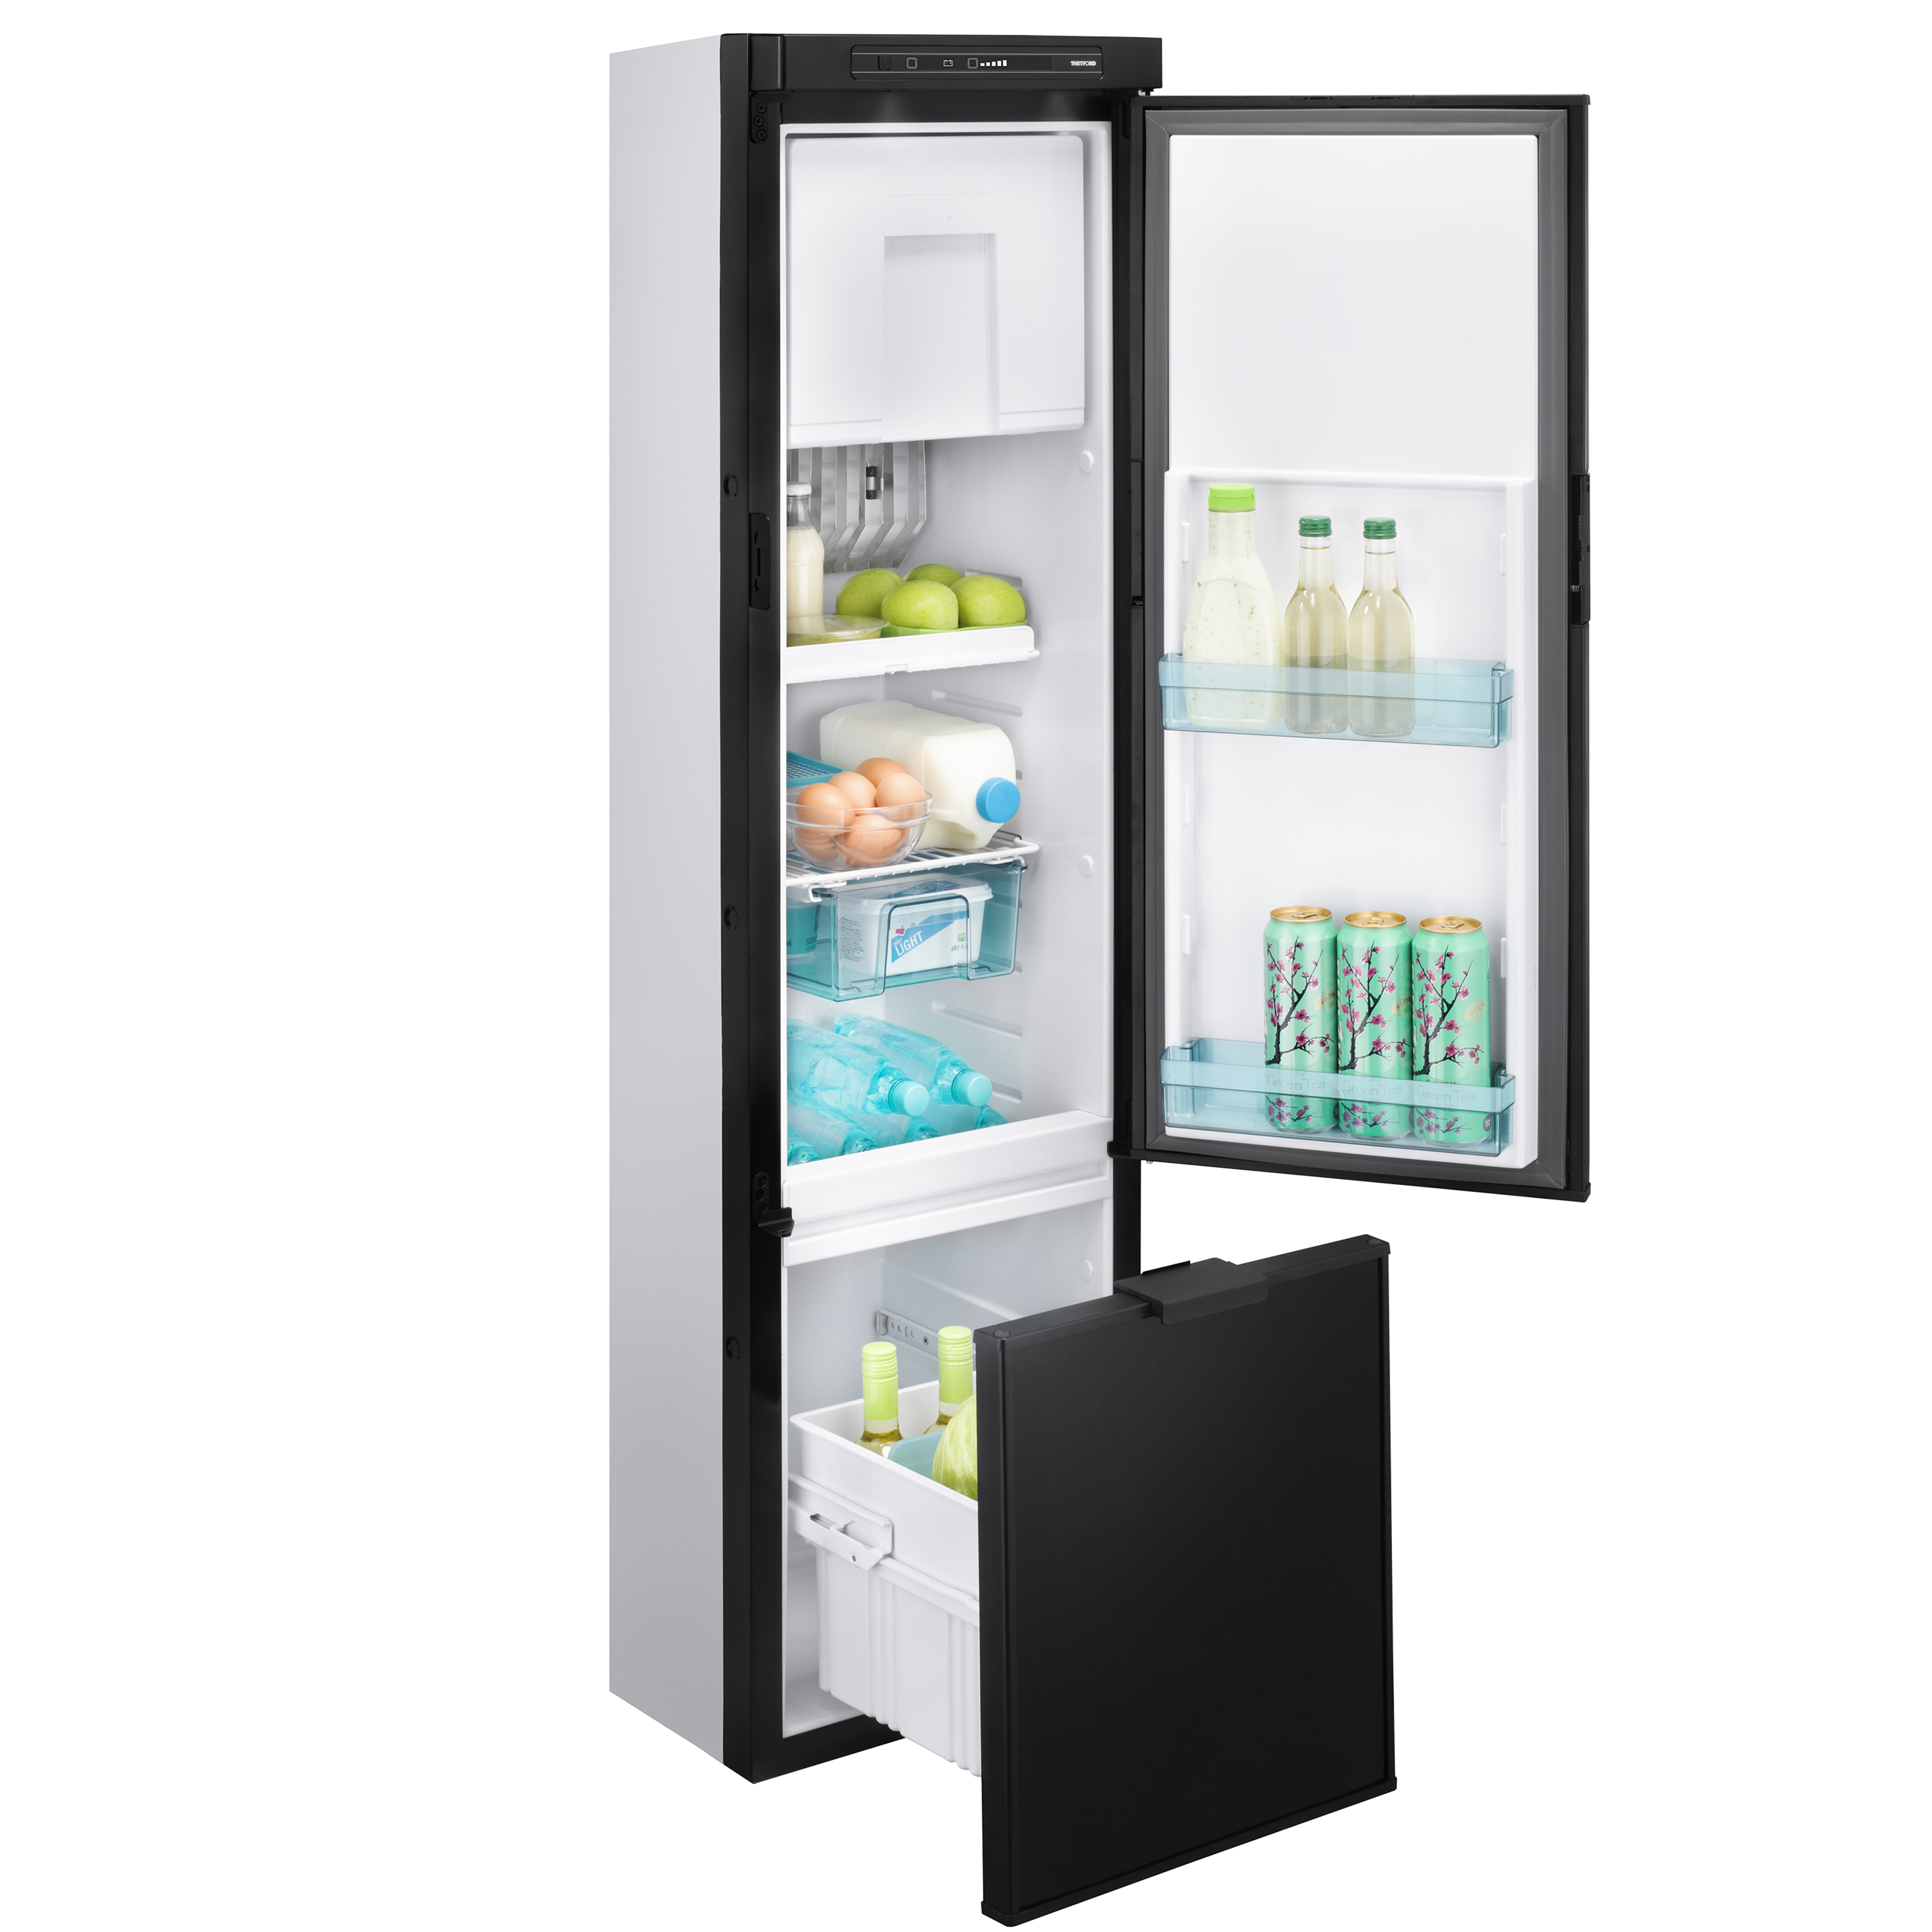 Polar NA7LX - State-of-the art RV Refrigerator from Norcold